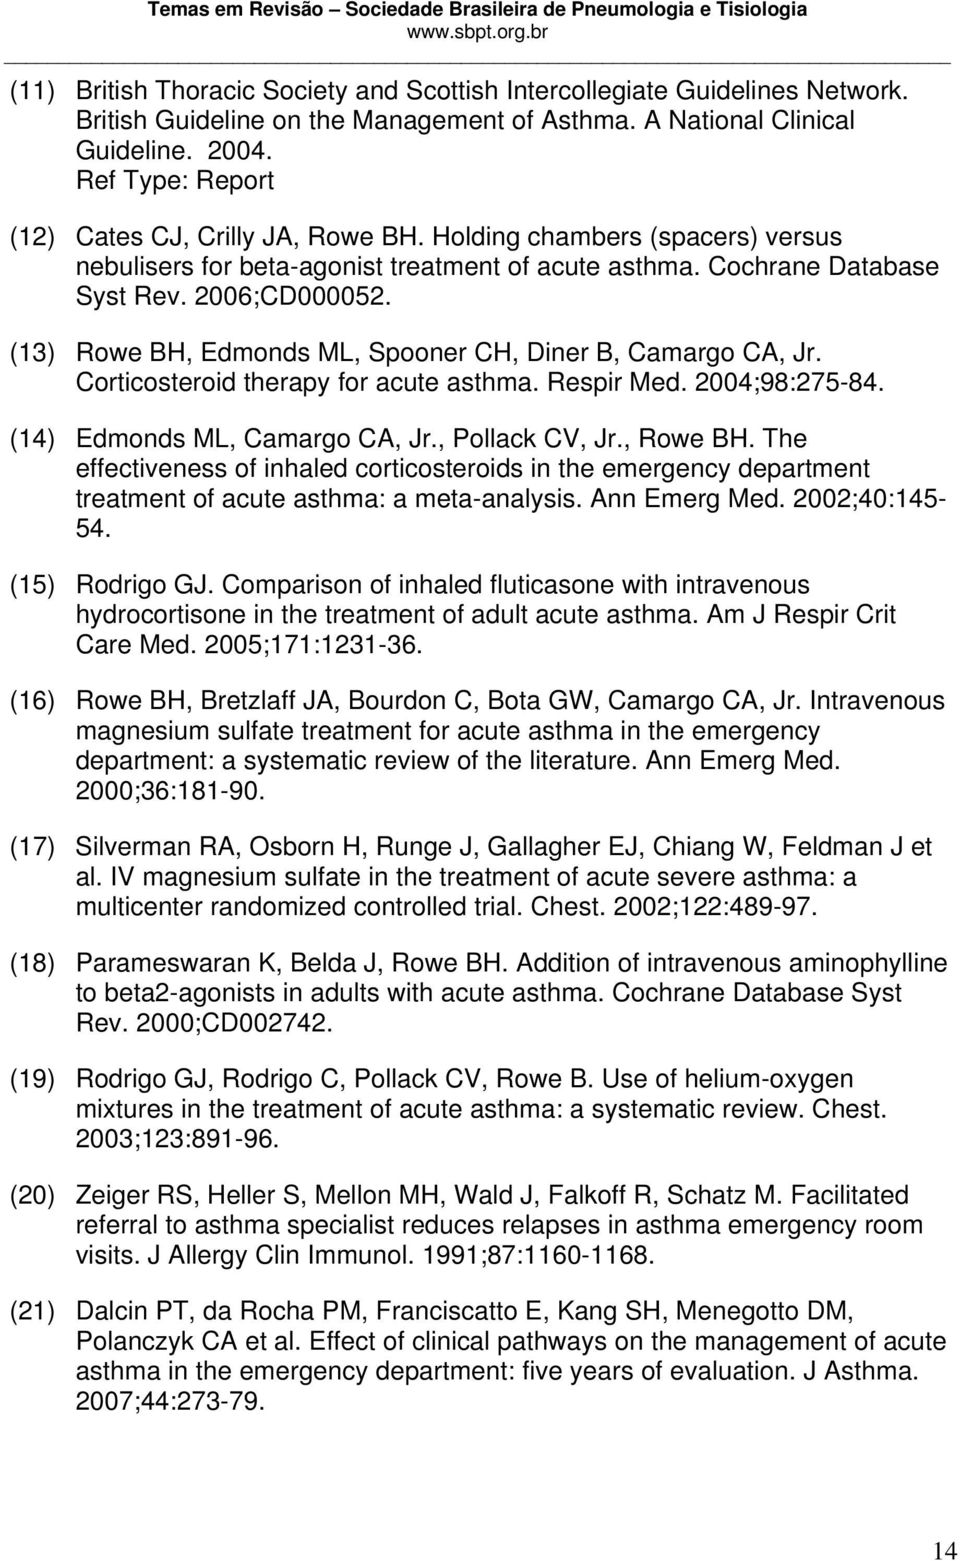 (13) Rowe BH, Edmonds ML, Spooner CH, Diner B, Camargo CA, Jr. Corticosteroid therapy for acute asthma. Respir Med. 2004;98:275-84. (14) Edmonds ML, Camargo CA, Jr., Pollack CV, Jr., Rowe BH.